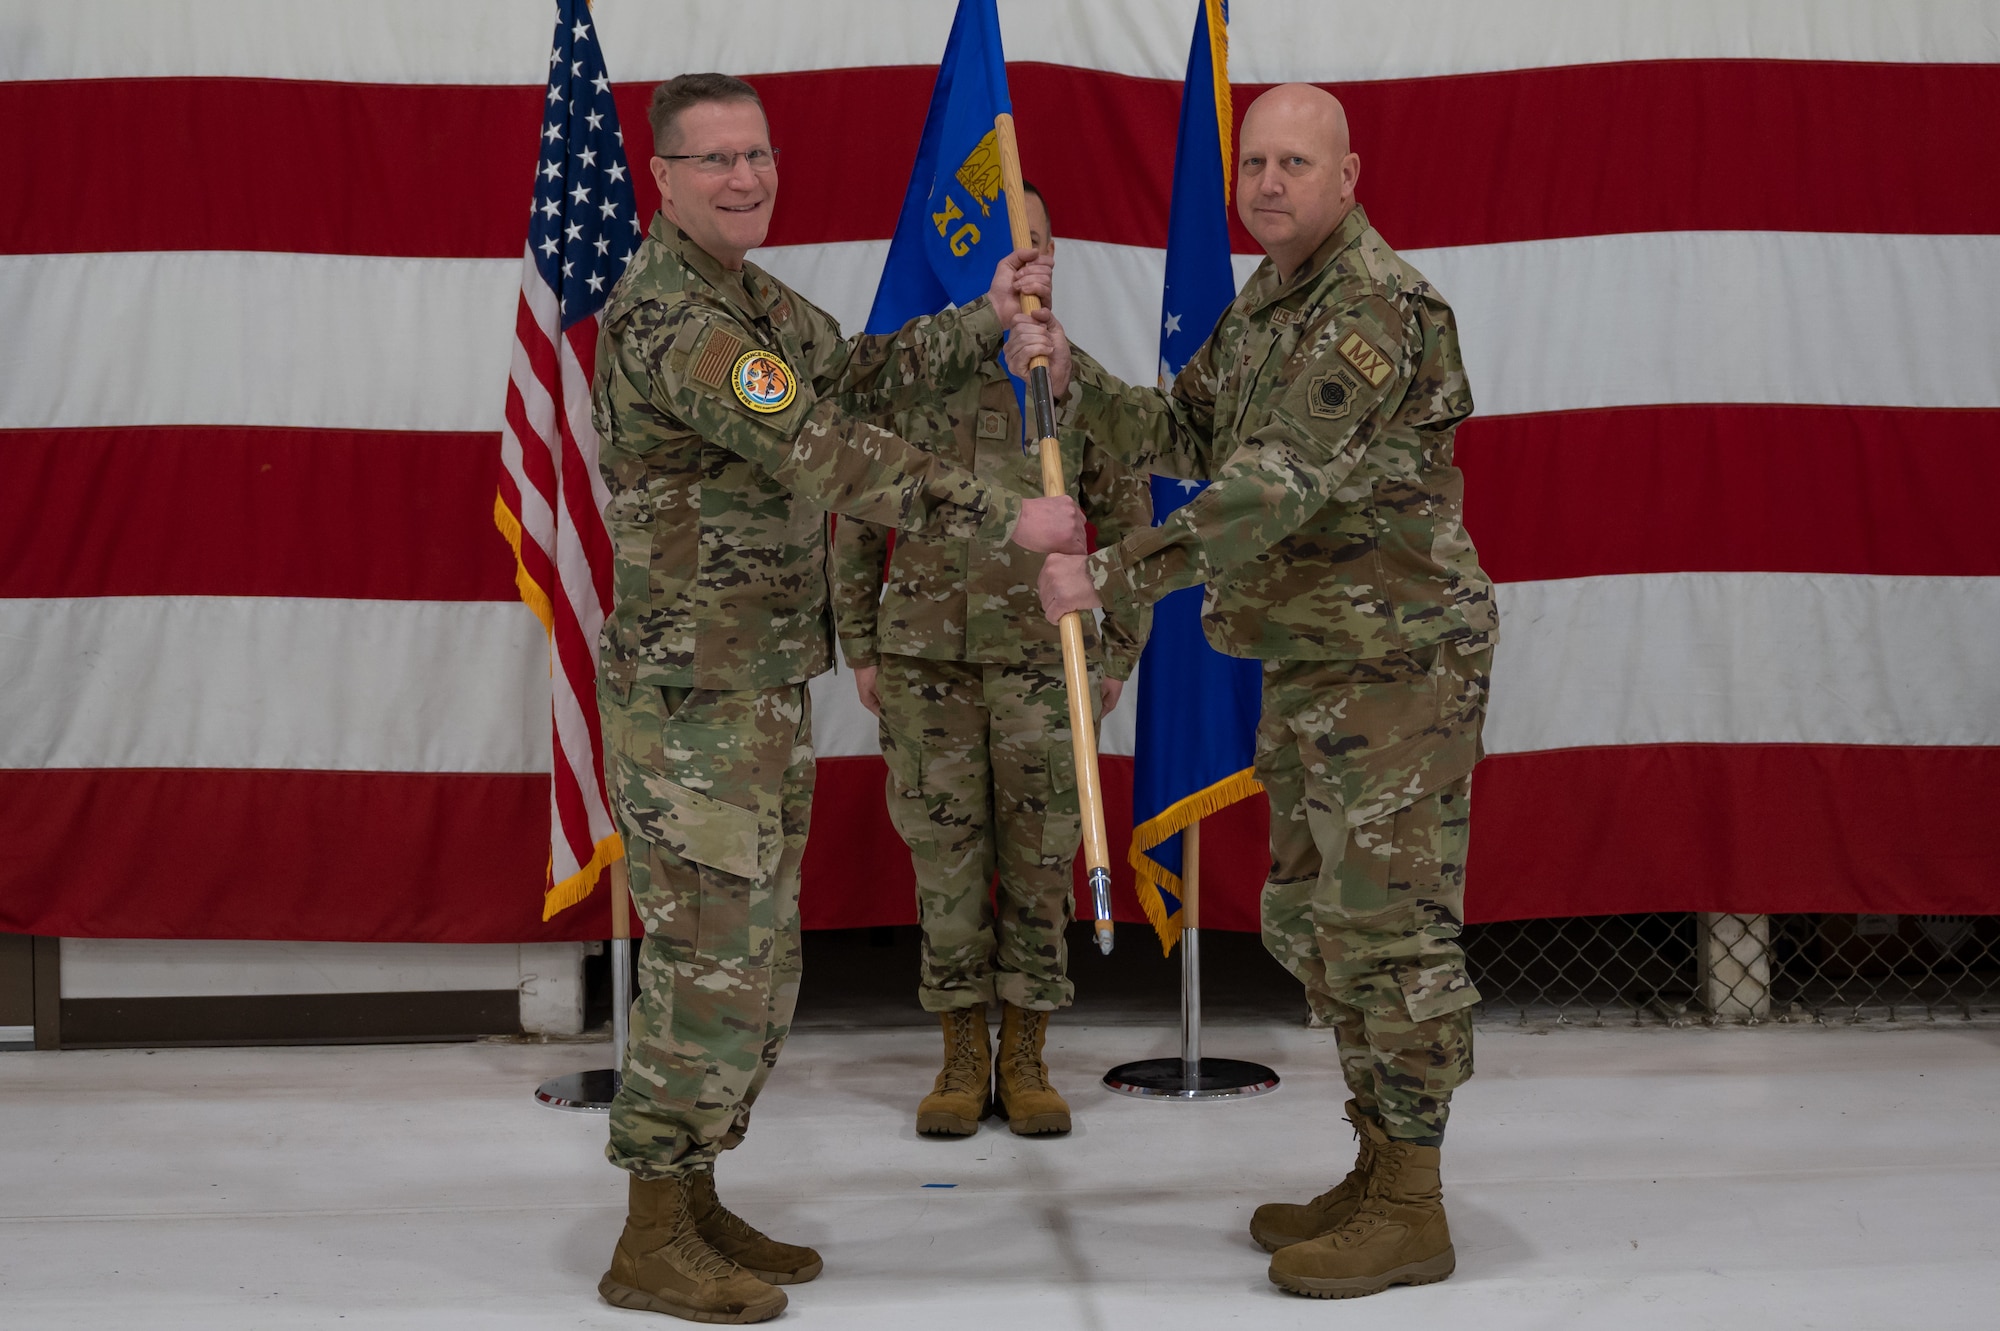 Col. Karwin Weaver assumes command of the 419th MXG